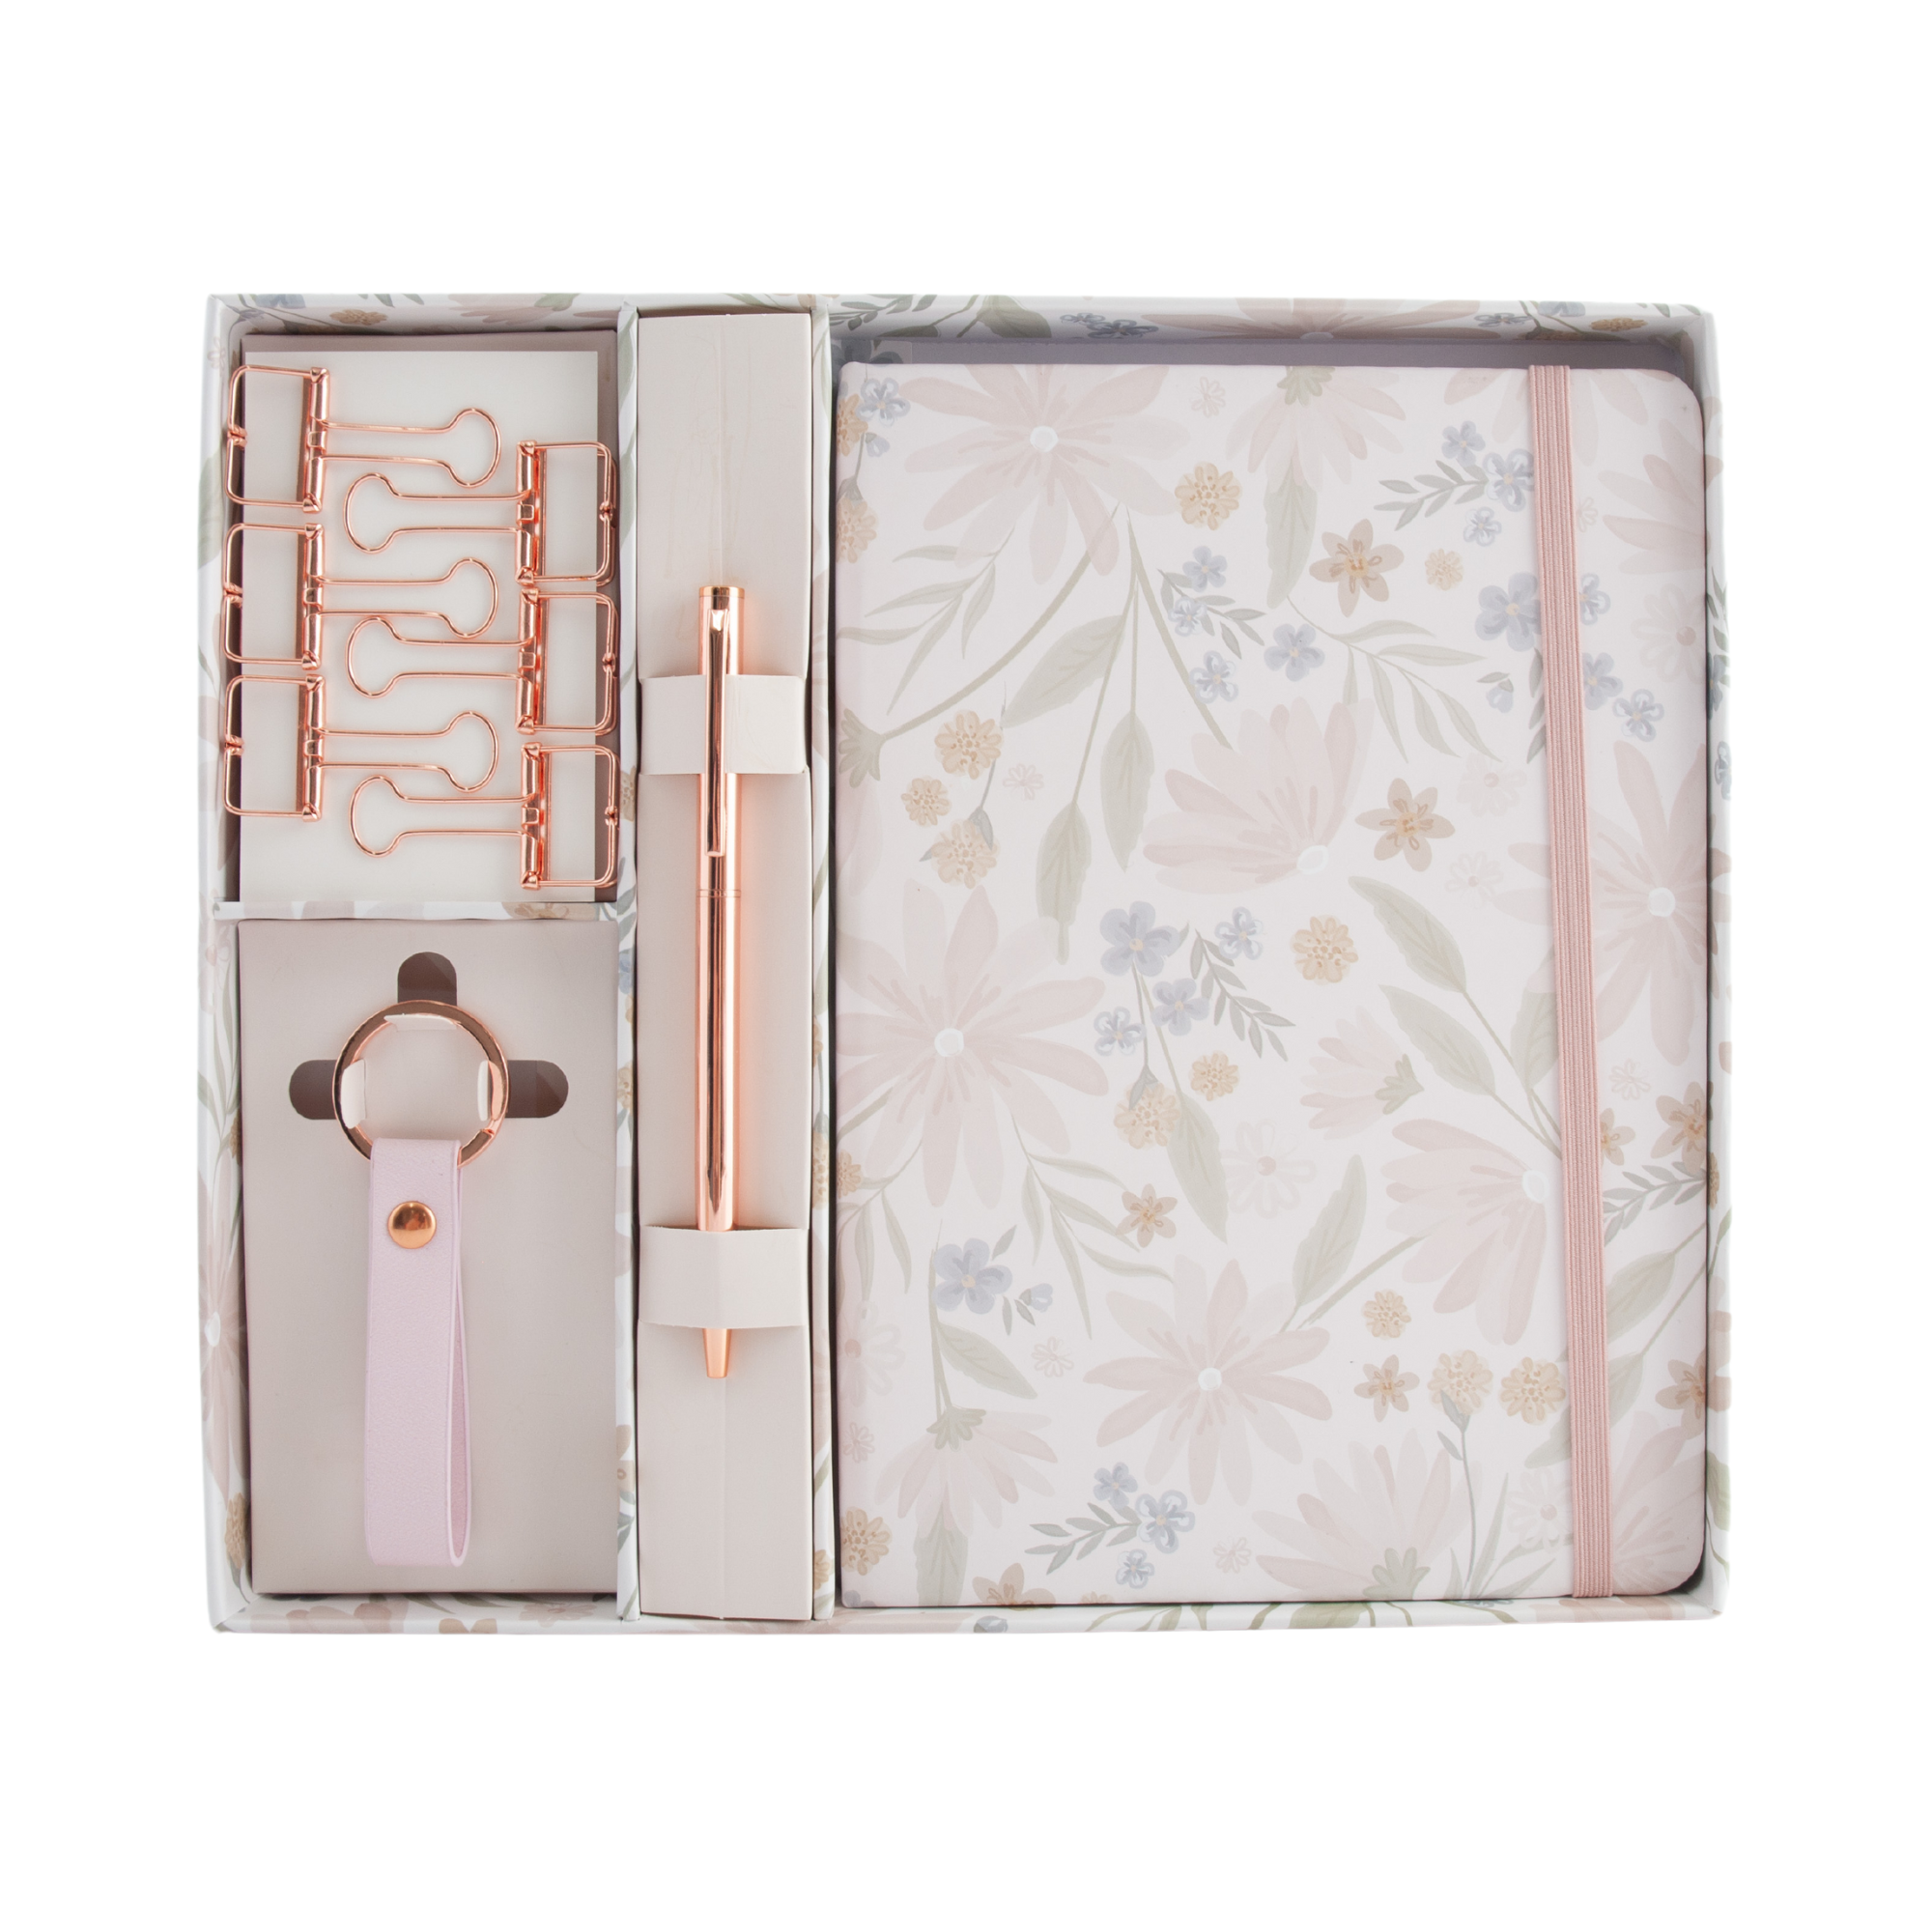 A5 Stationery 9Pc Gift Set - Blushing Floral